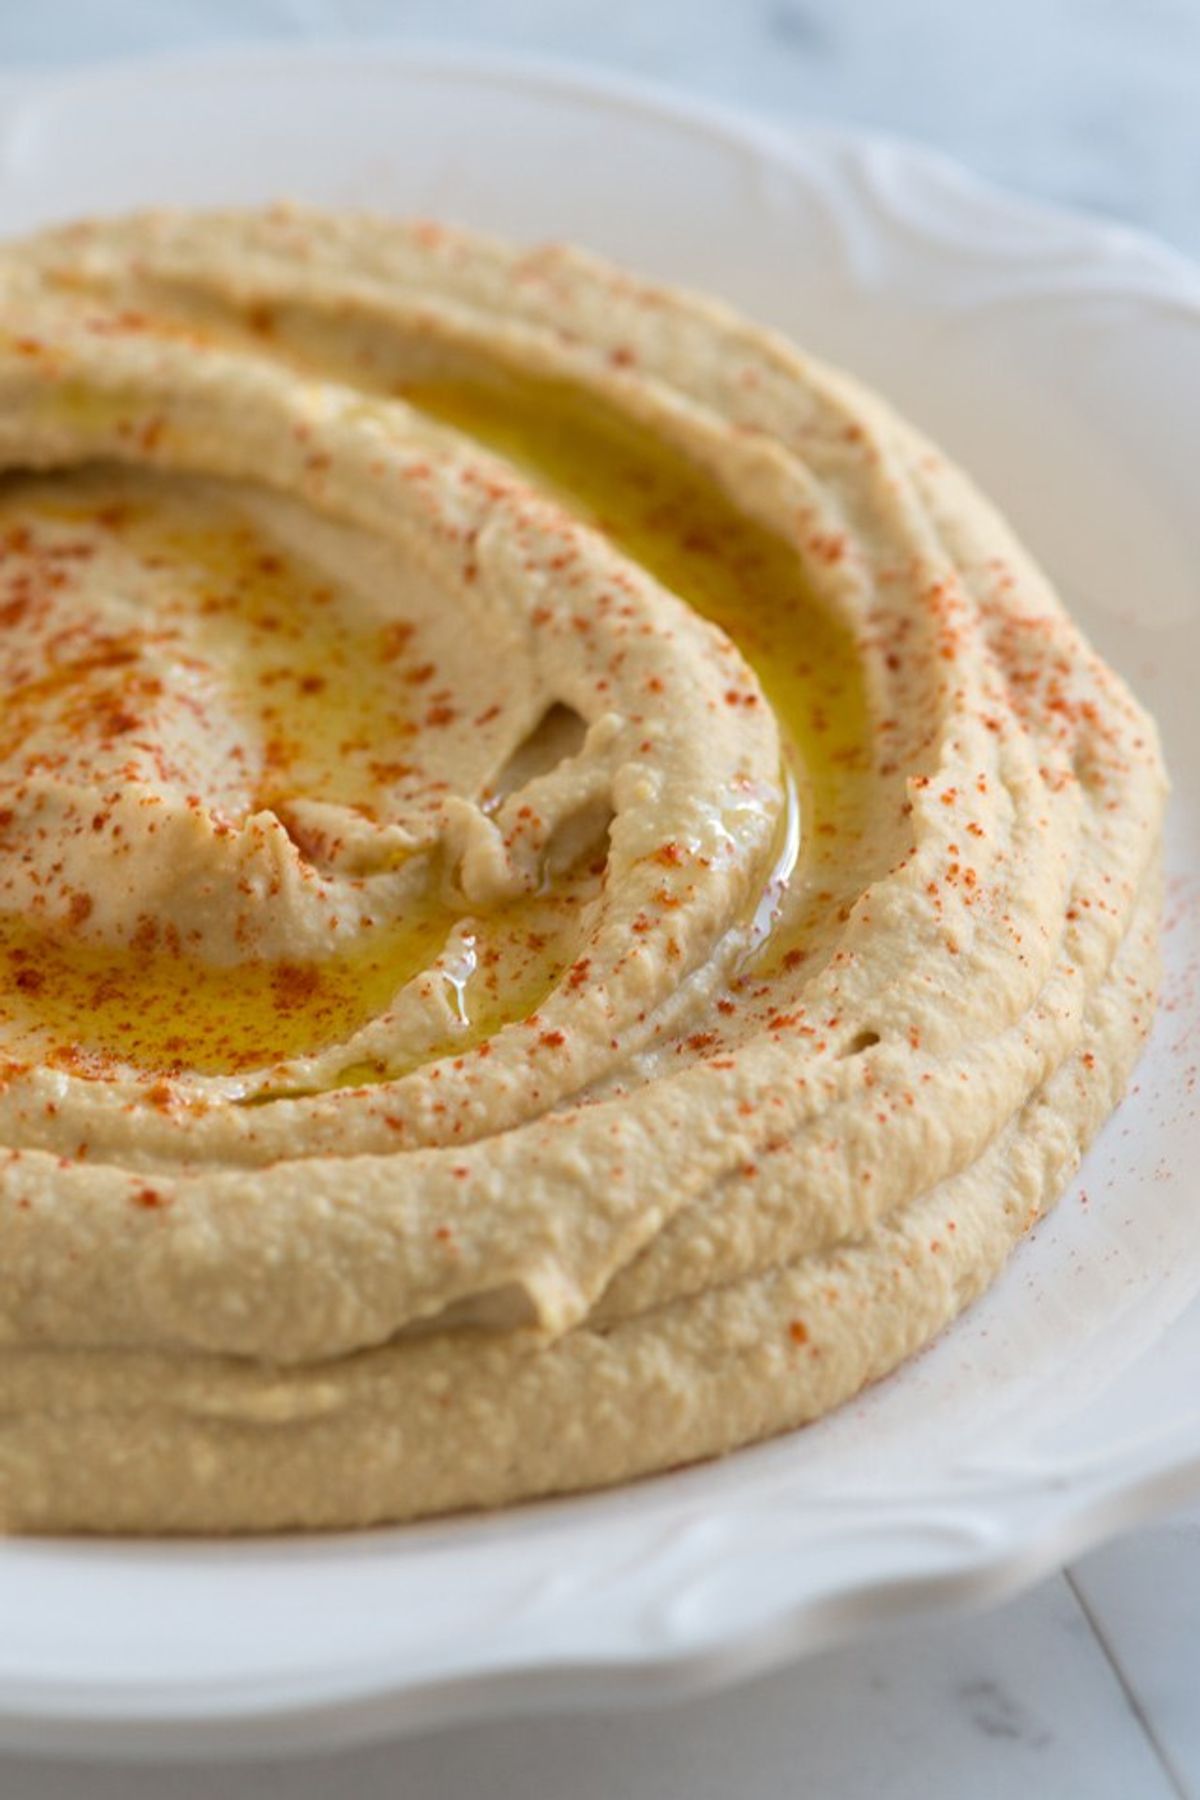 Can One Restaurant's Hummus Help End the Arab-Israeli Conflict?